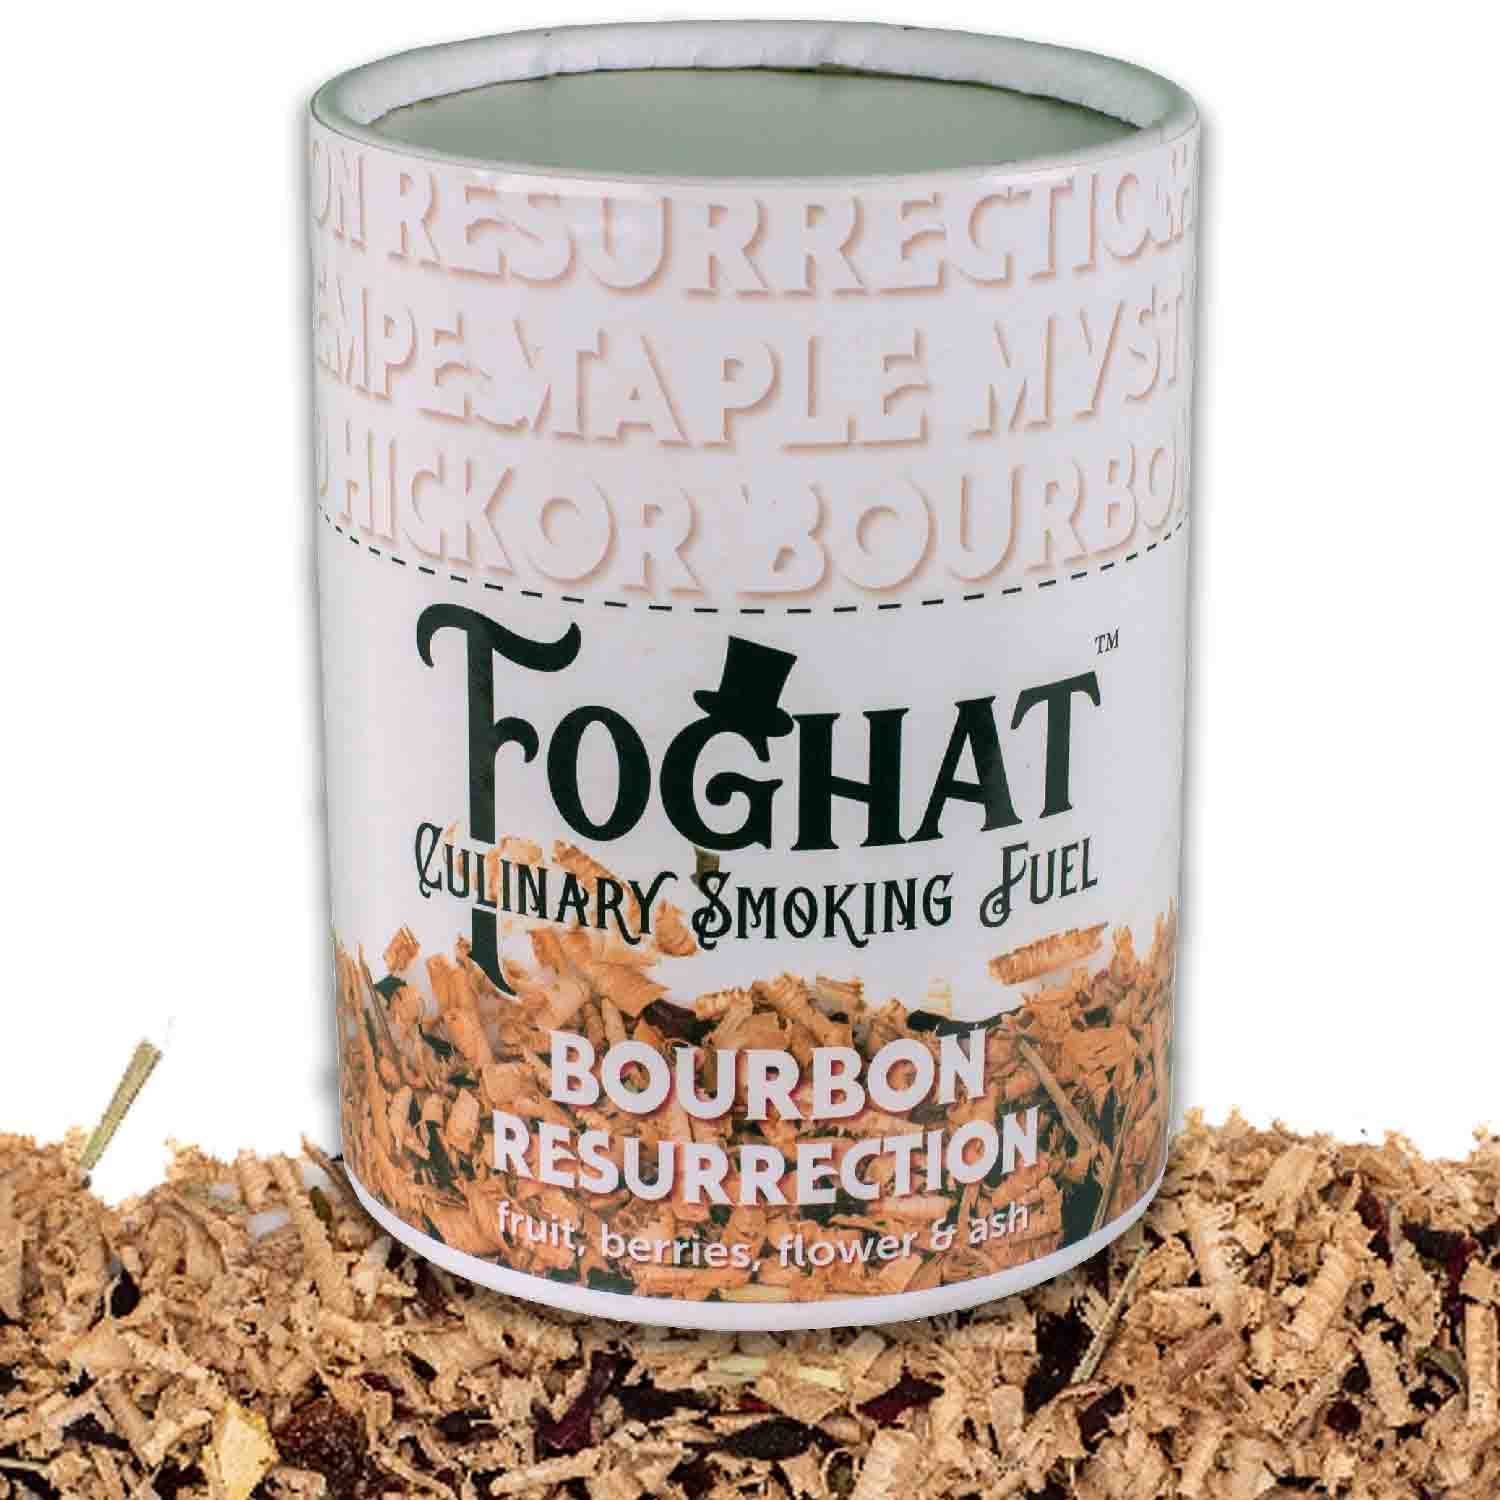 Bourbon Resurrection - Foghat Culinary Smoking Fuel - The Tool Store